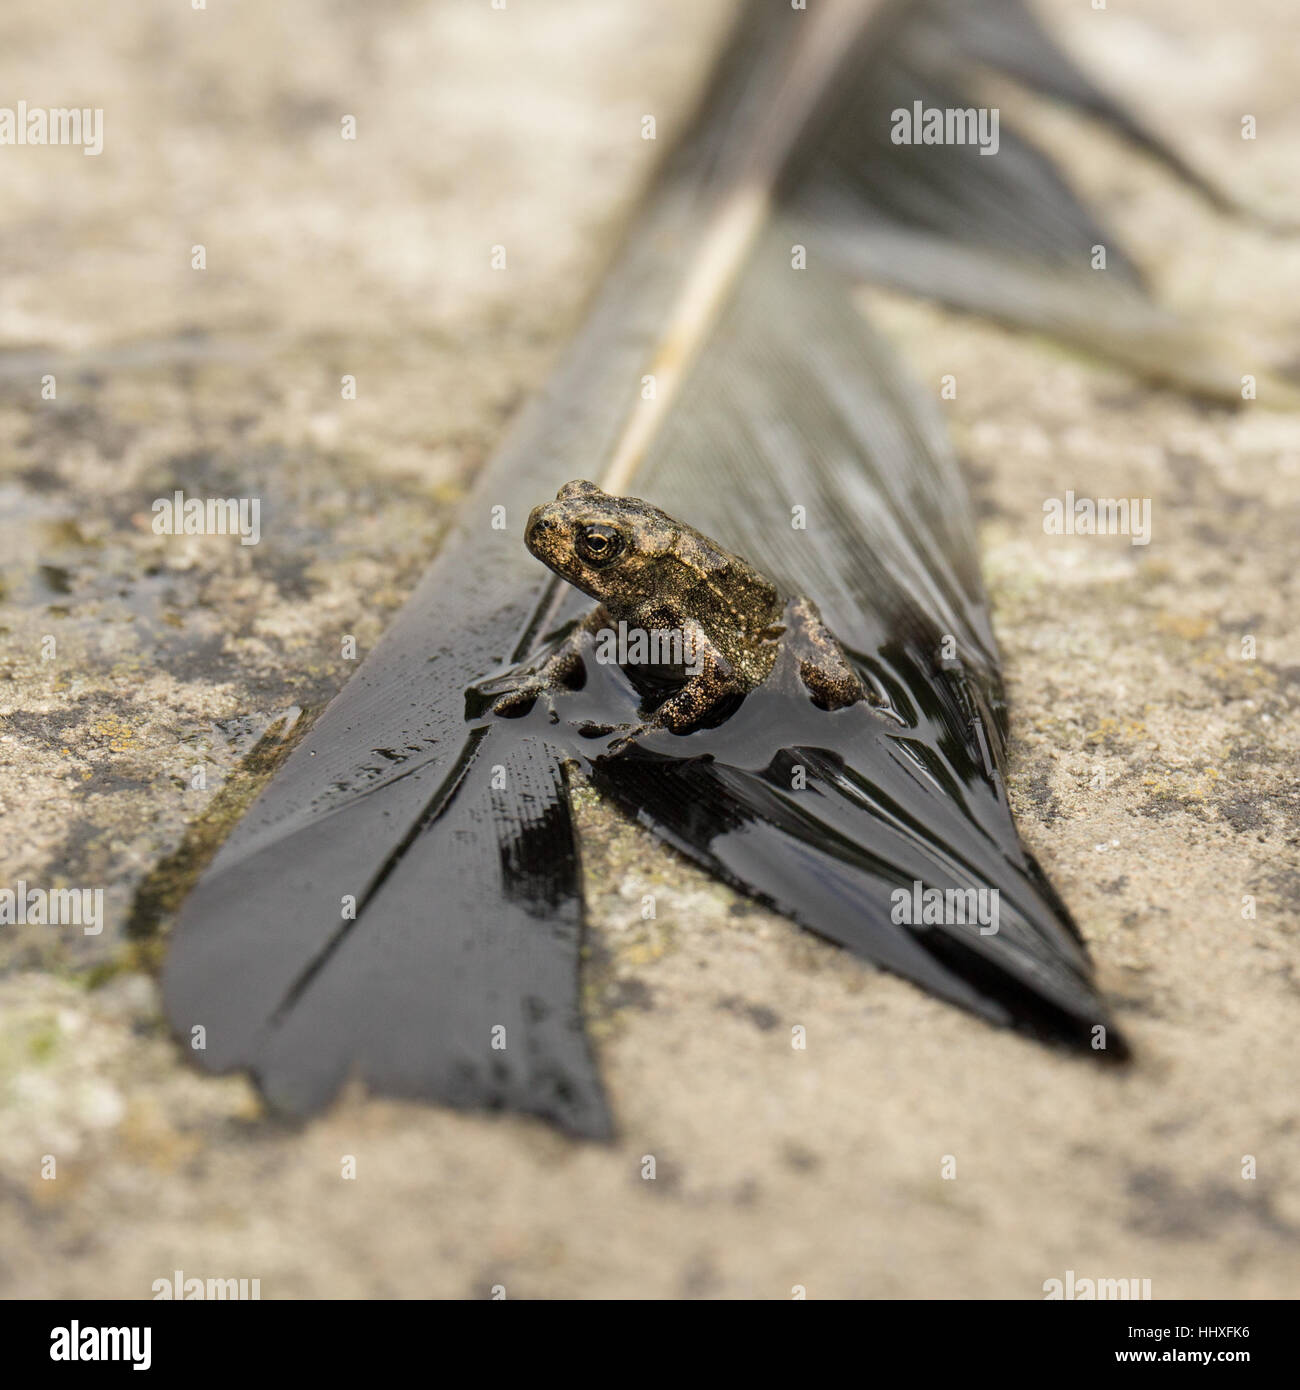 small baby common frog sitting on a wet feather Stock Photo